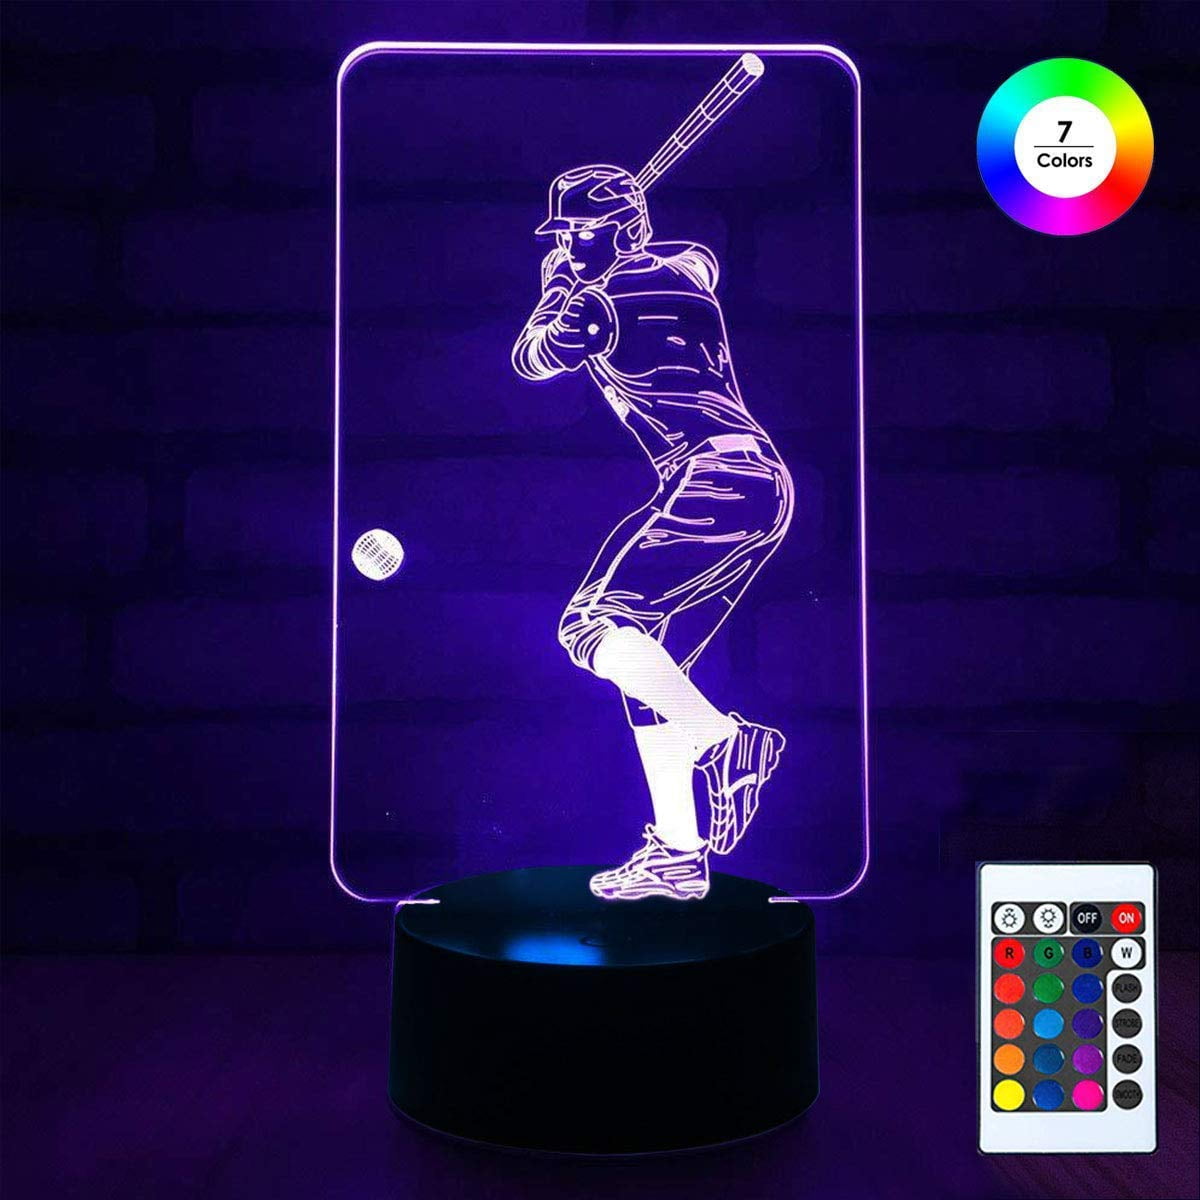 3-AA Batteries not Included Led Desk Lamp with 2 Acrylic Flats for Kids Boys Girls Gifts 3D Optical Illusion Night Light with 7 Colors Unitake Baseball Lamp 